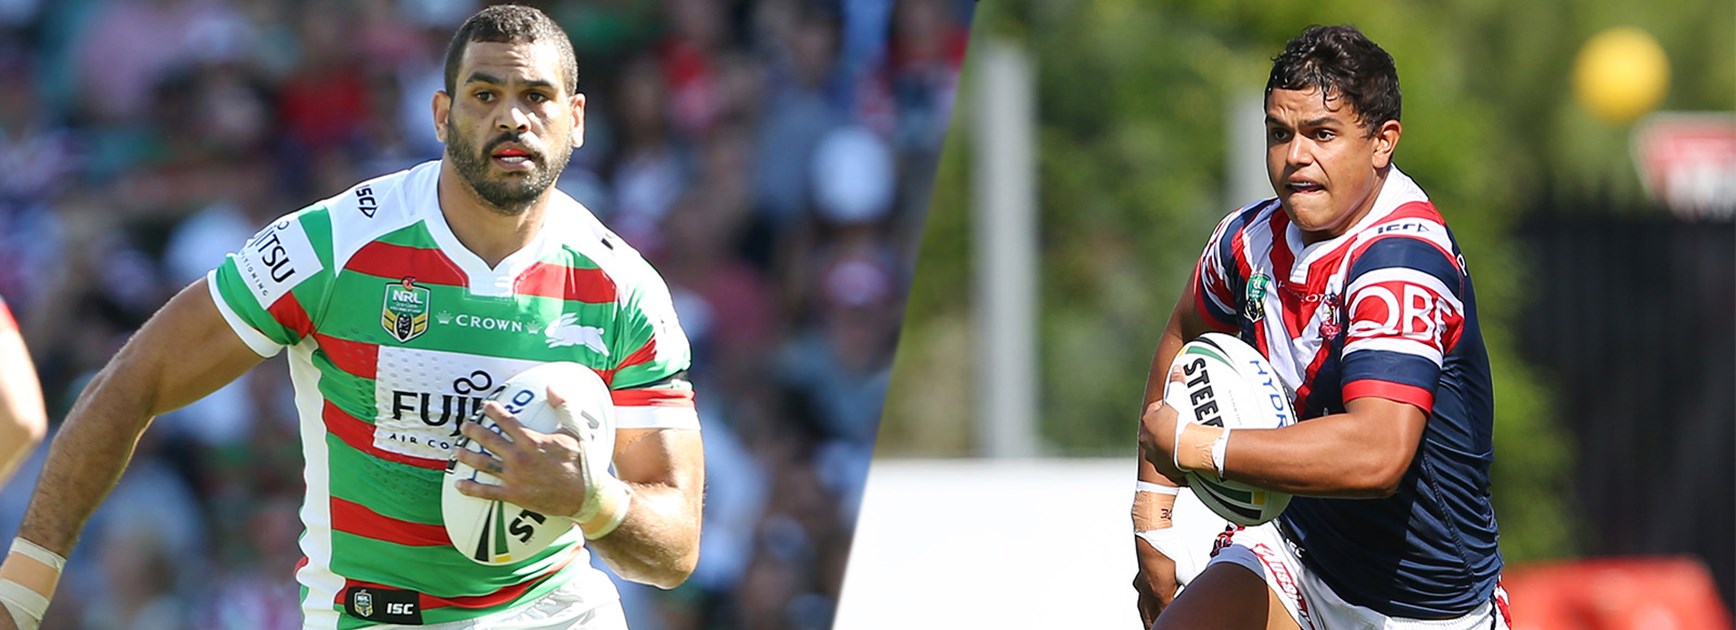 Greg Inglis takes on Latrell Mitchell when the Rabbitohs host the Roosters at ANZ Stadium.